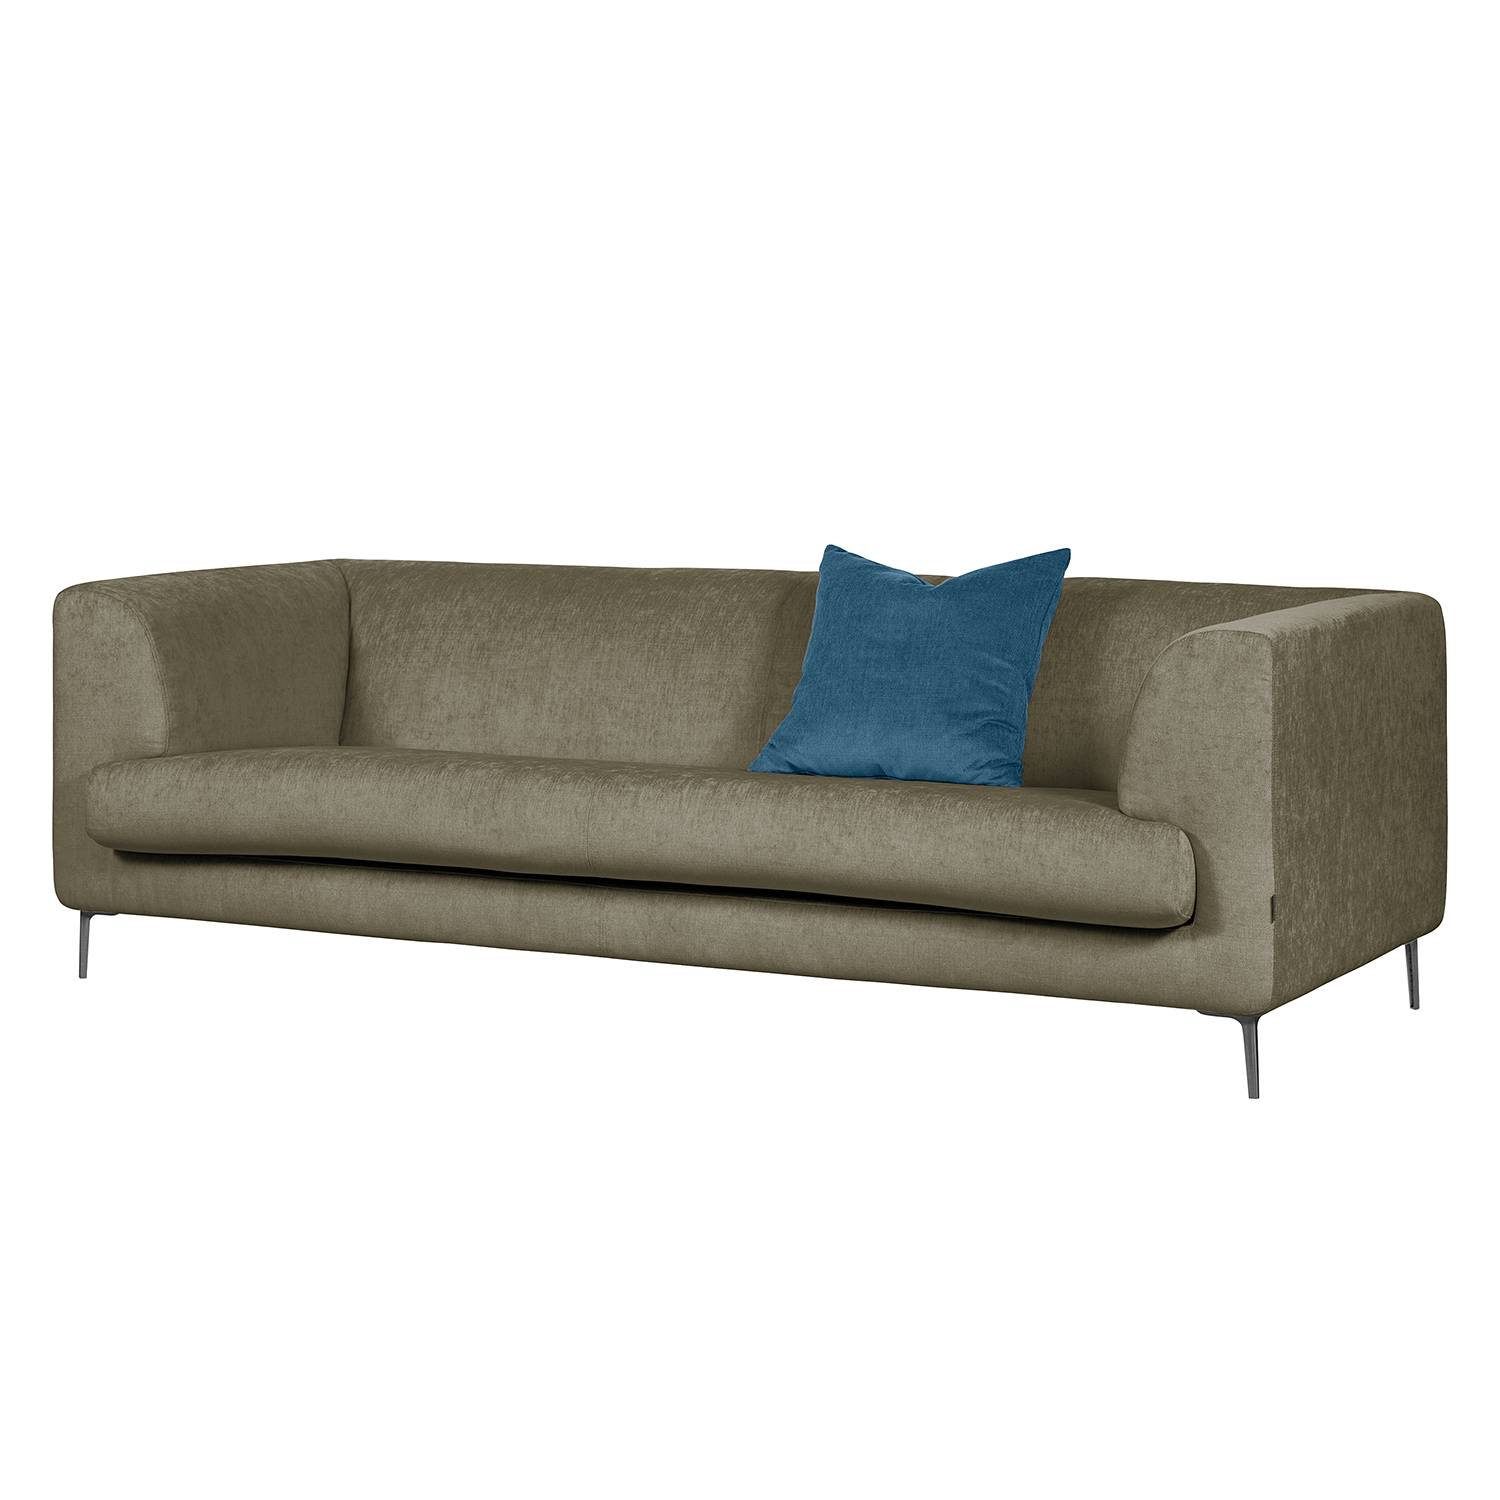 Sofa Sombret (3-Sitzer) Webstoff - Taupe, Says Who